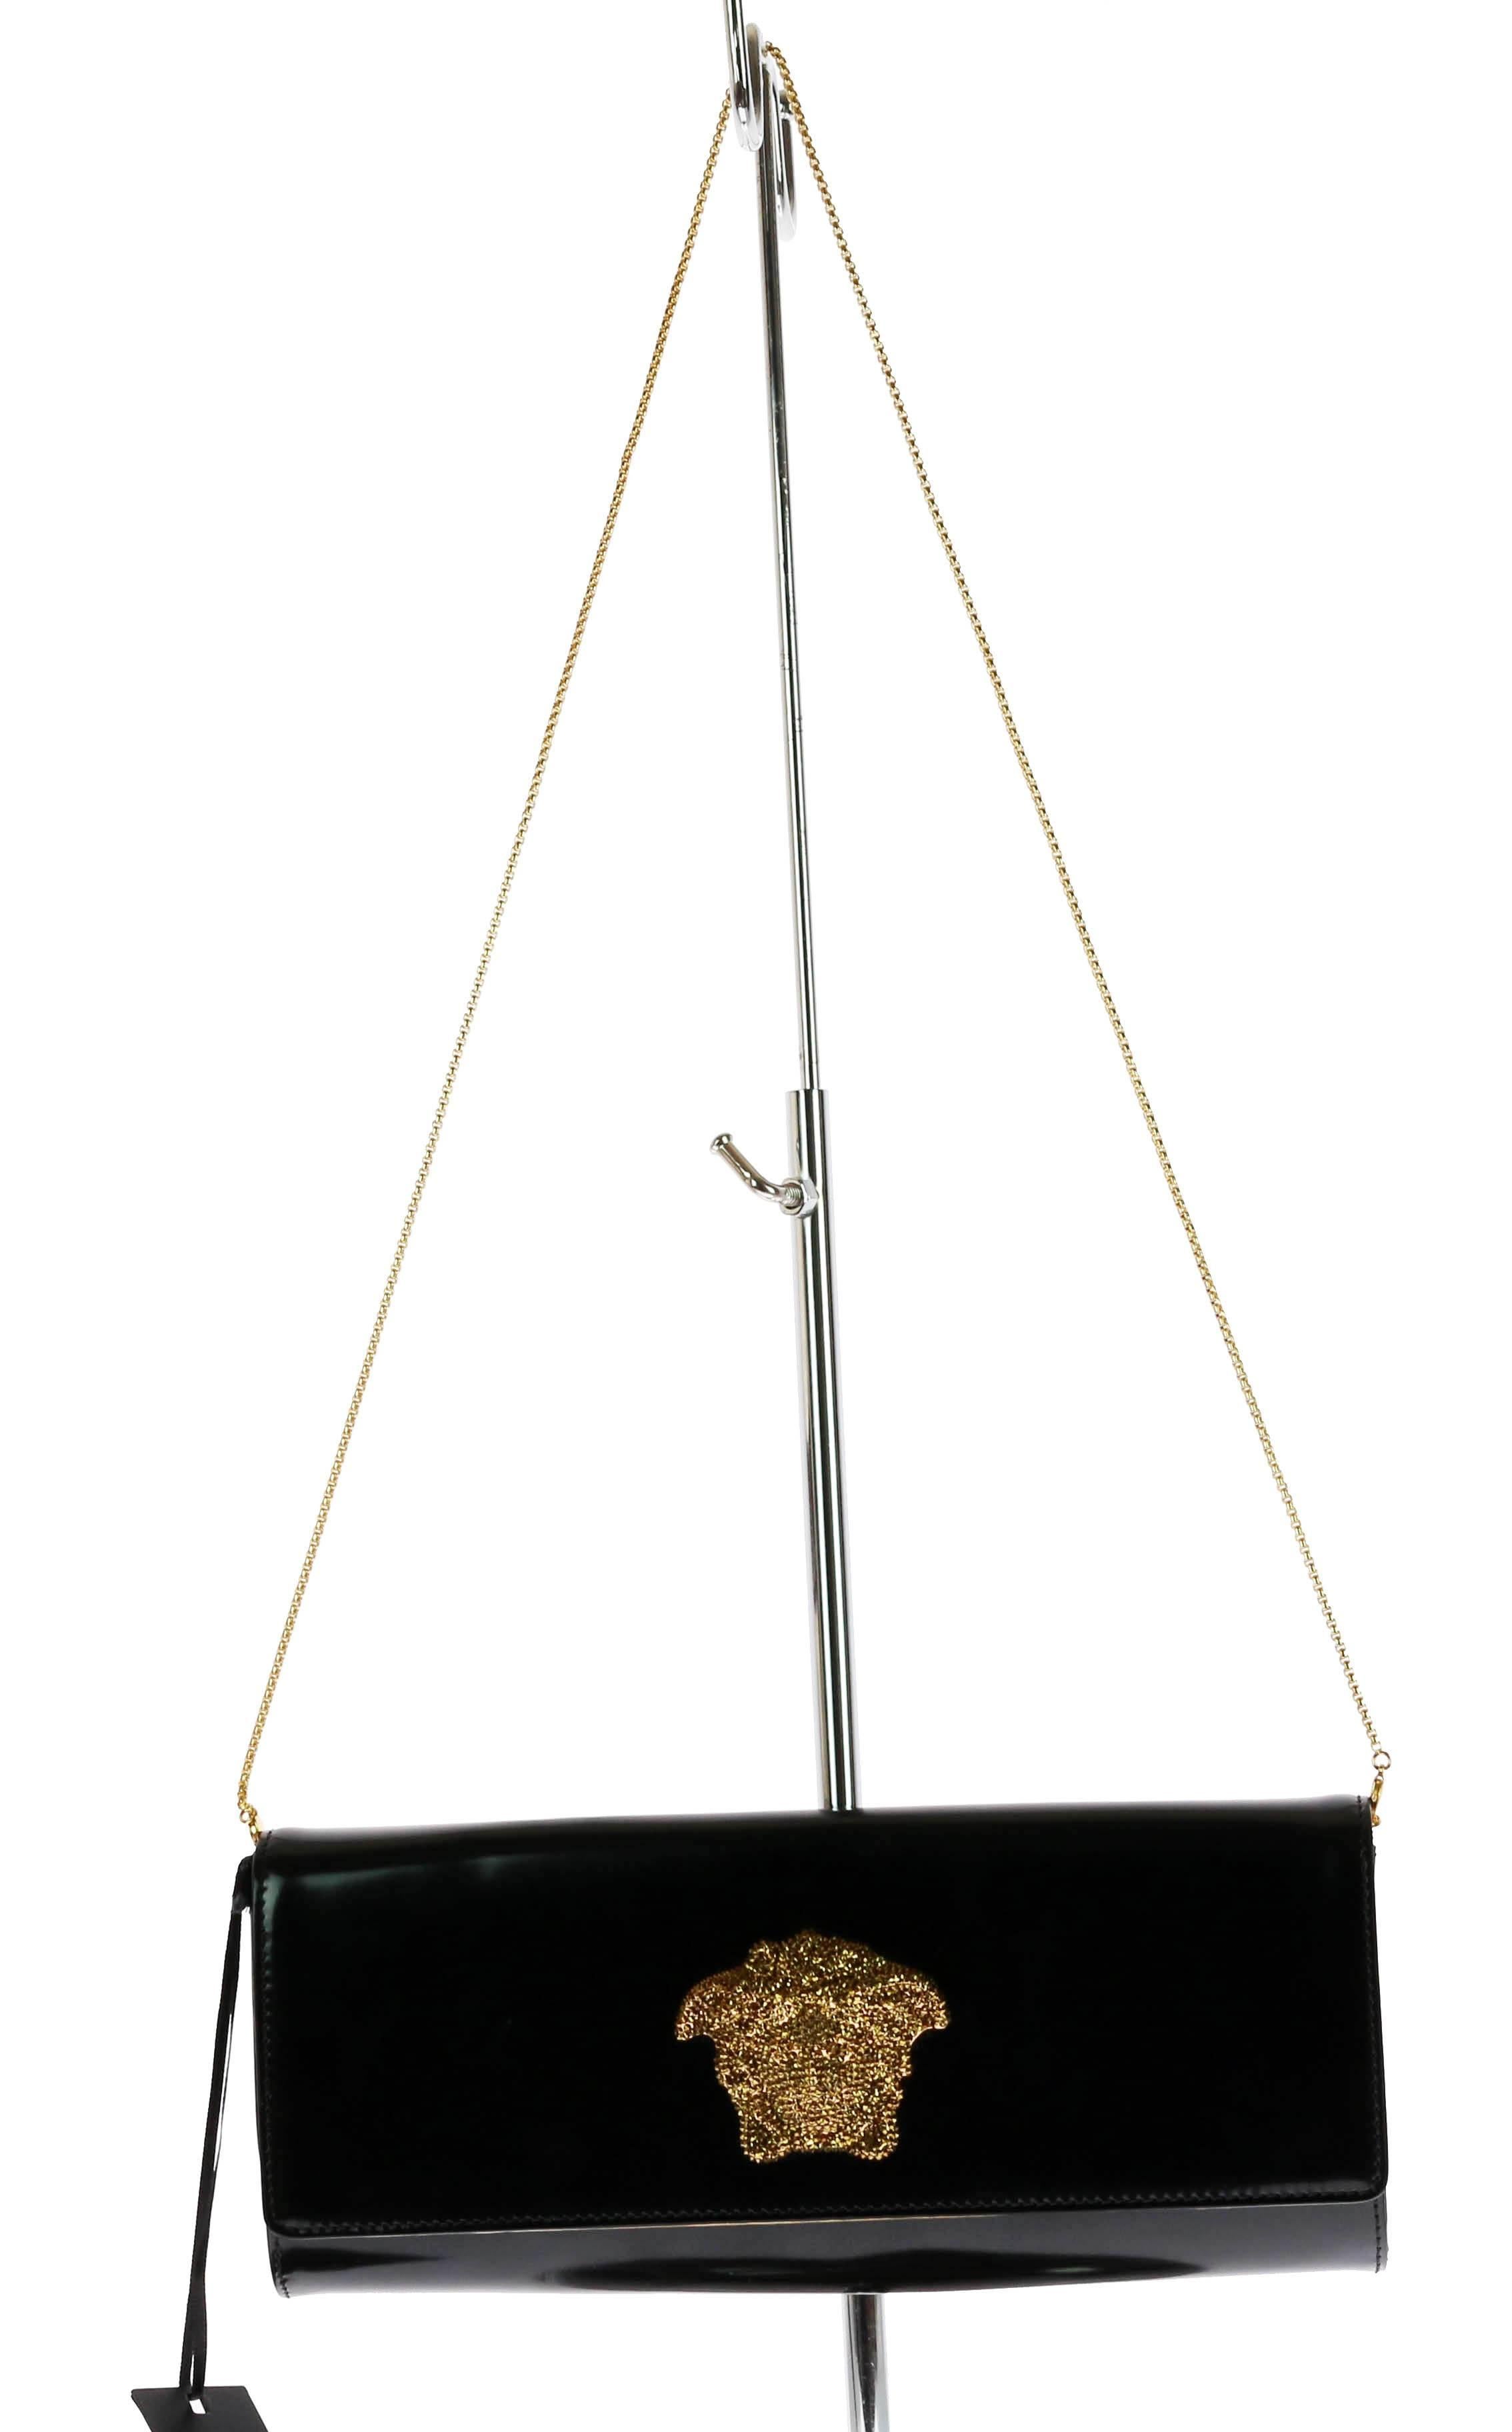 Black leather clutch from Versace featuring a foldover top with snap closure, gold-tone hardware, an internal patch pocket and an internal logo stamp.

Embellished with crystal embellished Medusa head.

New